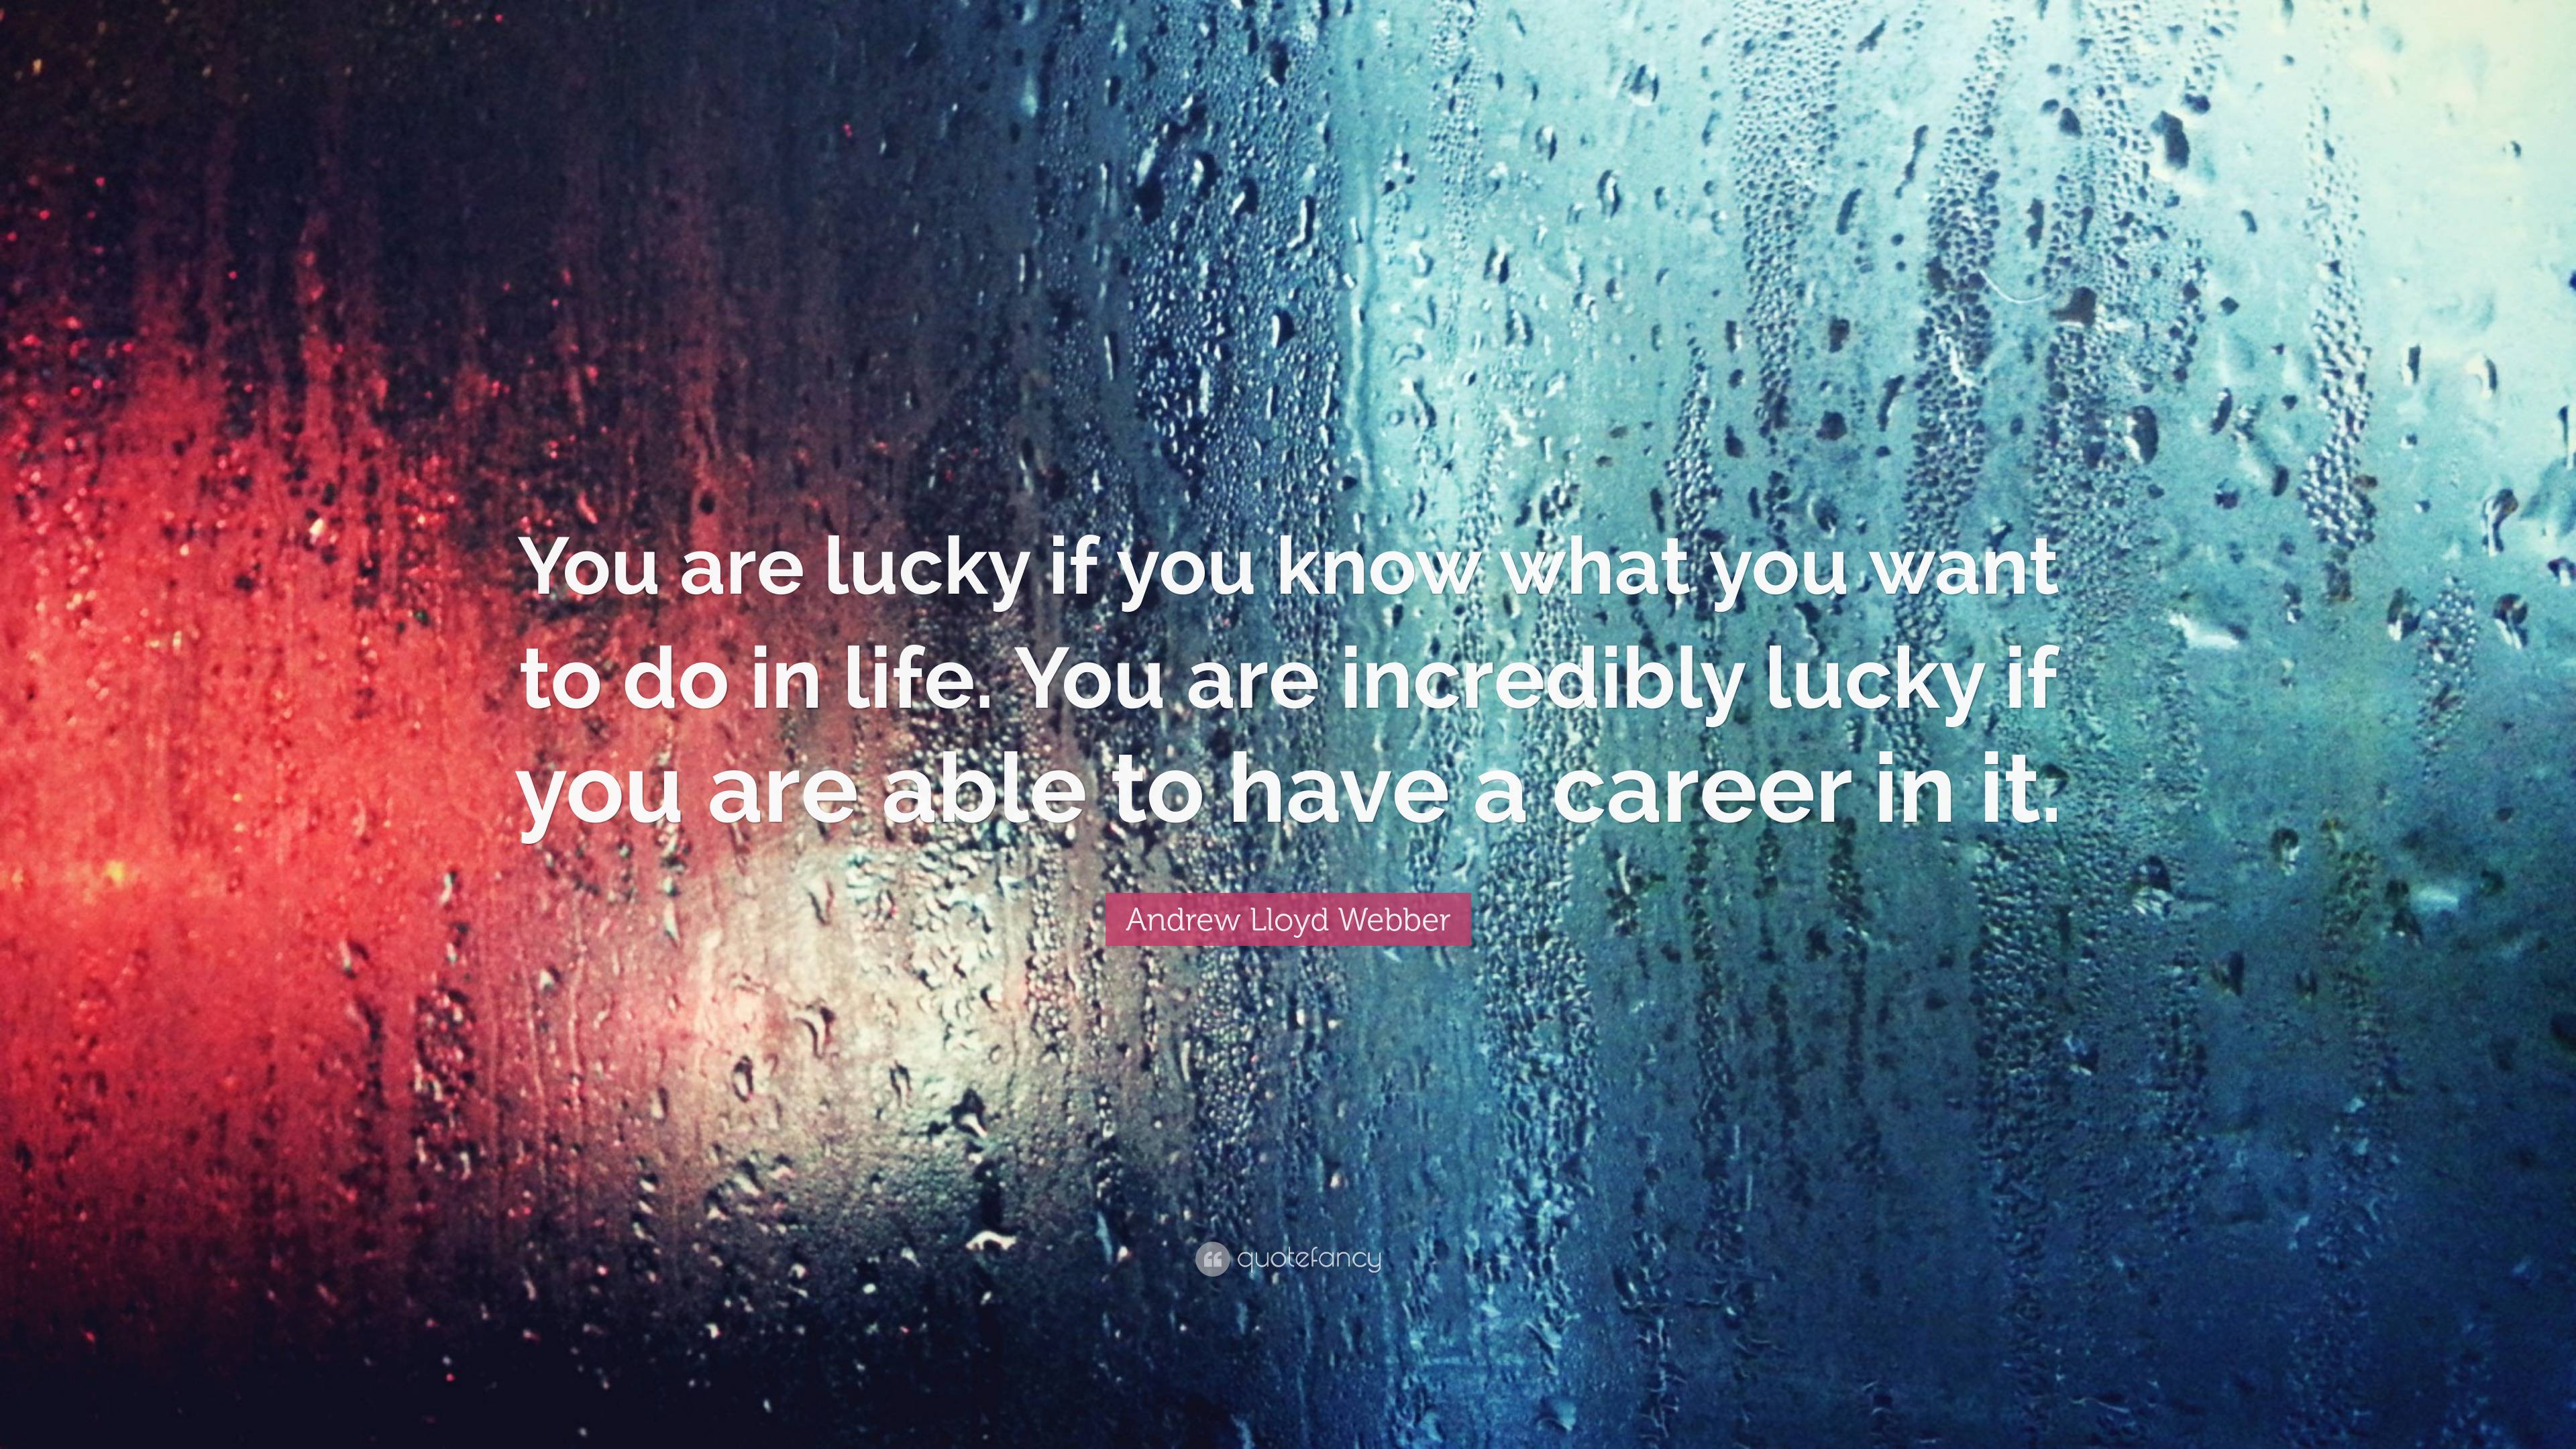 Andrew Lloyd Webber Quote: “You are lucky if you know what you want to ...